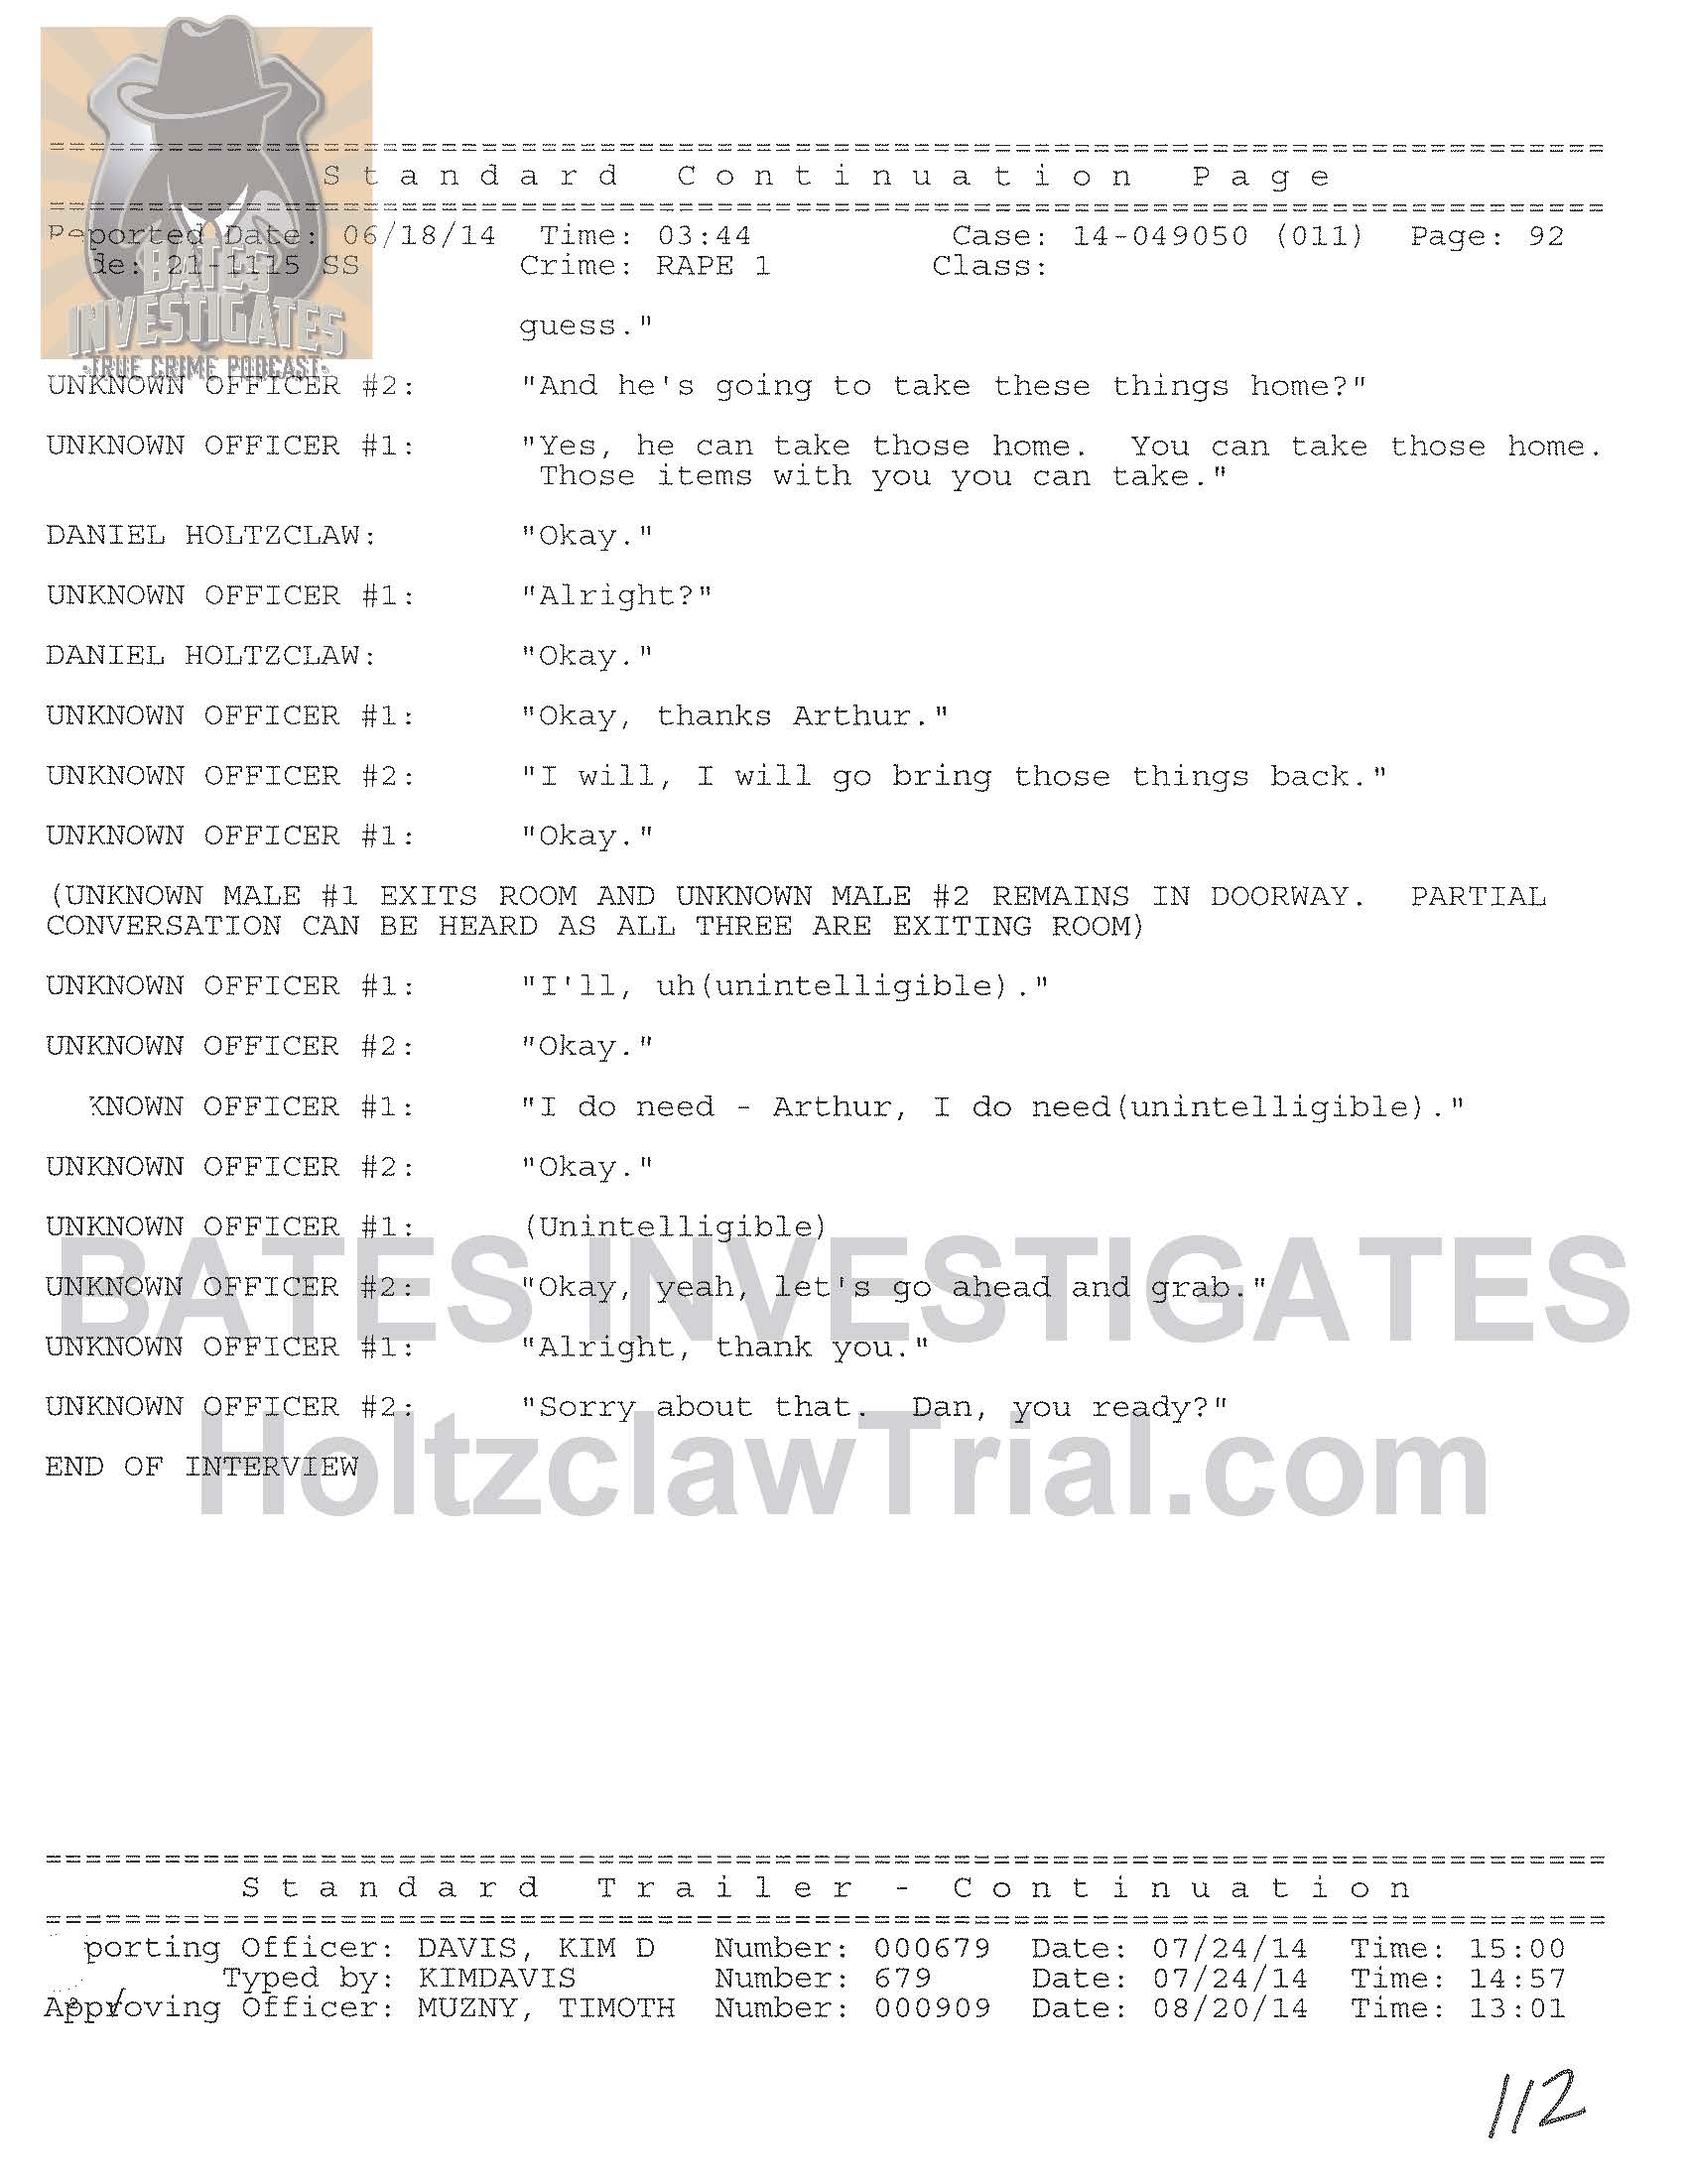 Holtzclaw Interrogation Transcript - Ep02 Redacted_Page_92.jpg